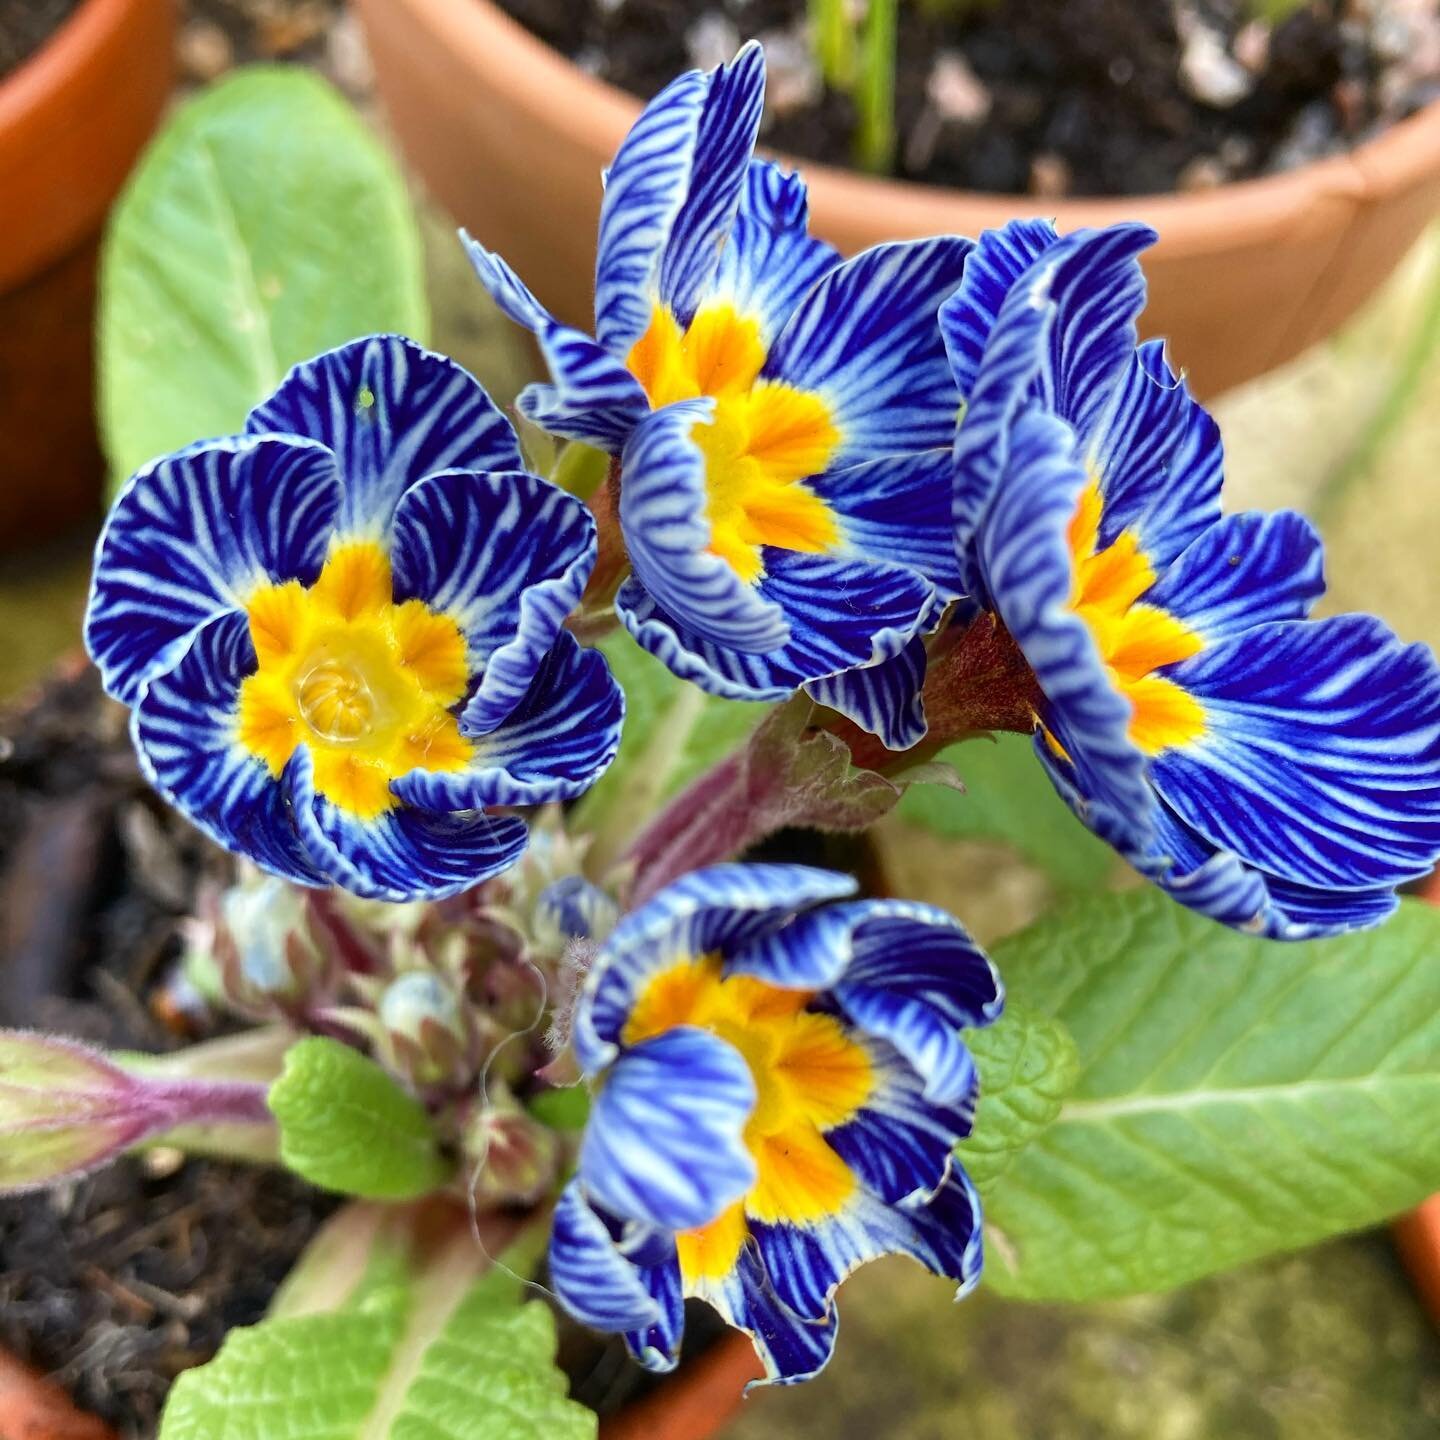 Did I mention that I love primulas?  Anyone else?  This is Zebra Blue and has the most amazing blue and white markings like delft pottery.  Somehow pretty weird and refined at the same time 🤷🏻&zwj;♀️. Either way they&rsquo;re making me very happy r